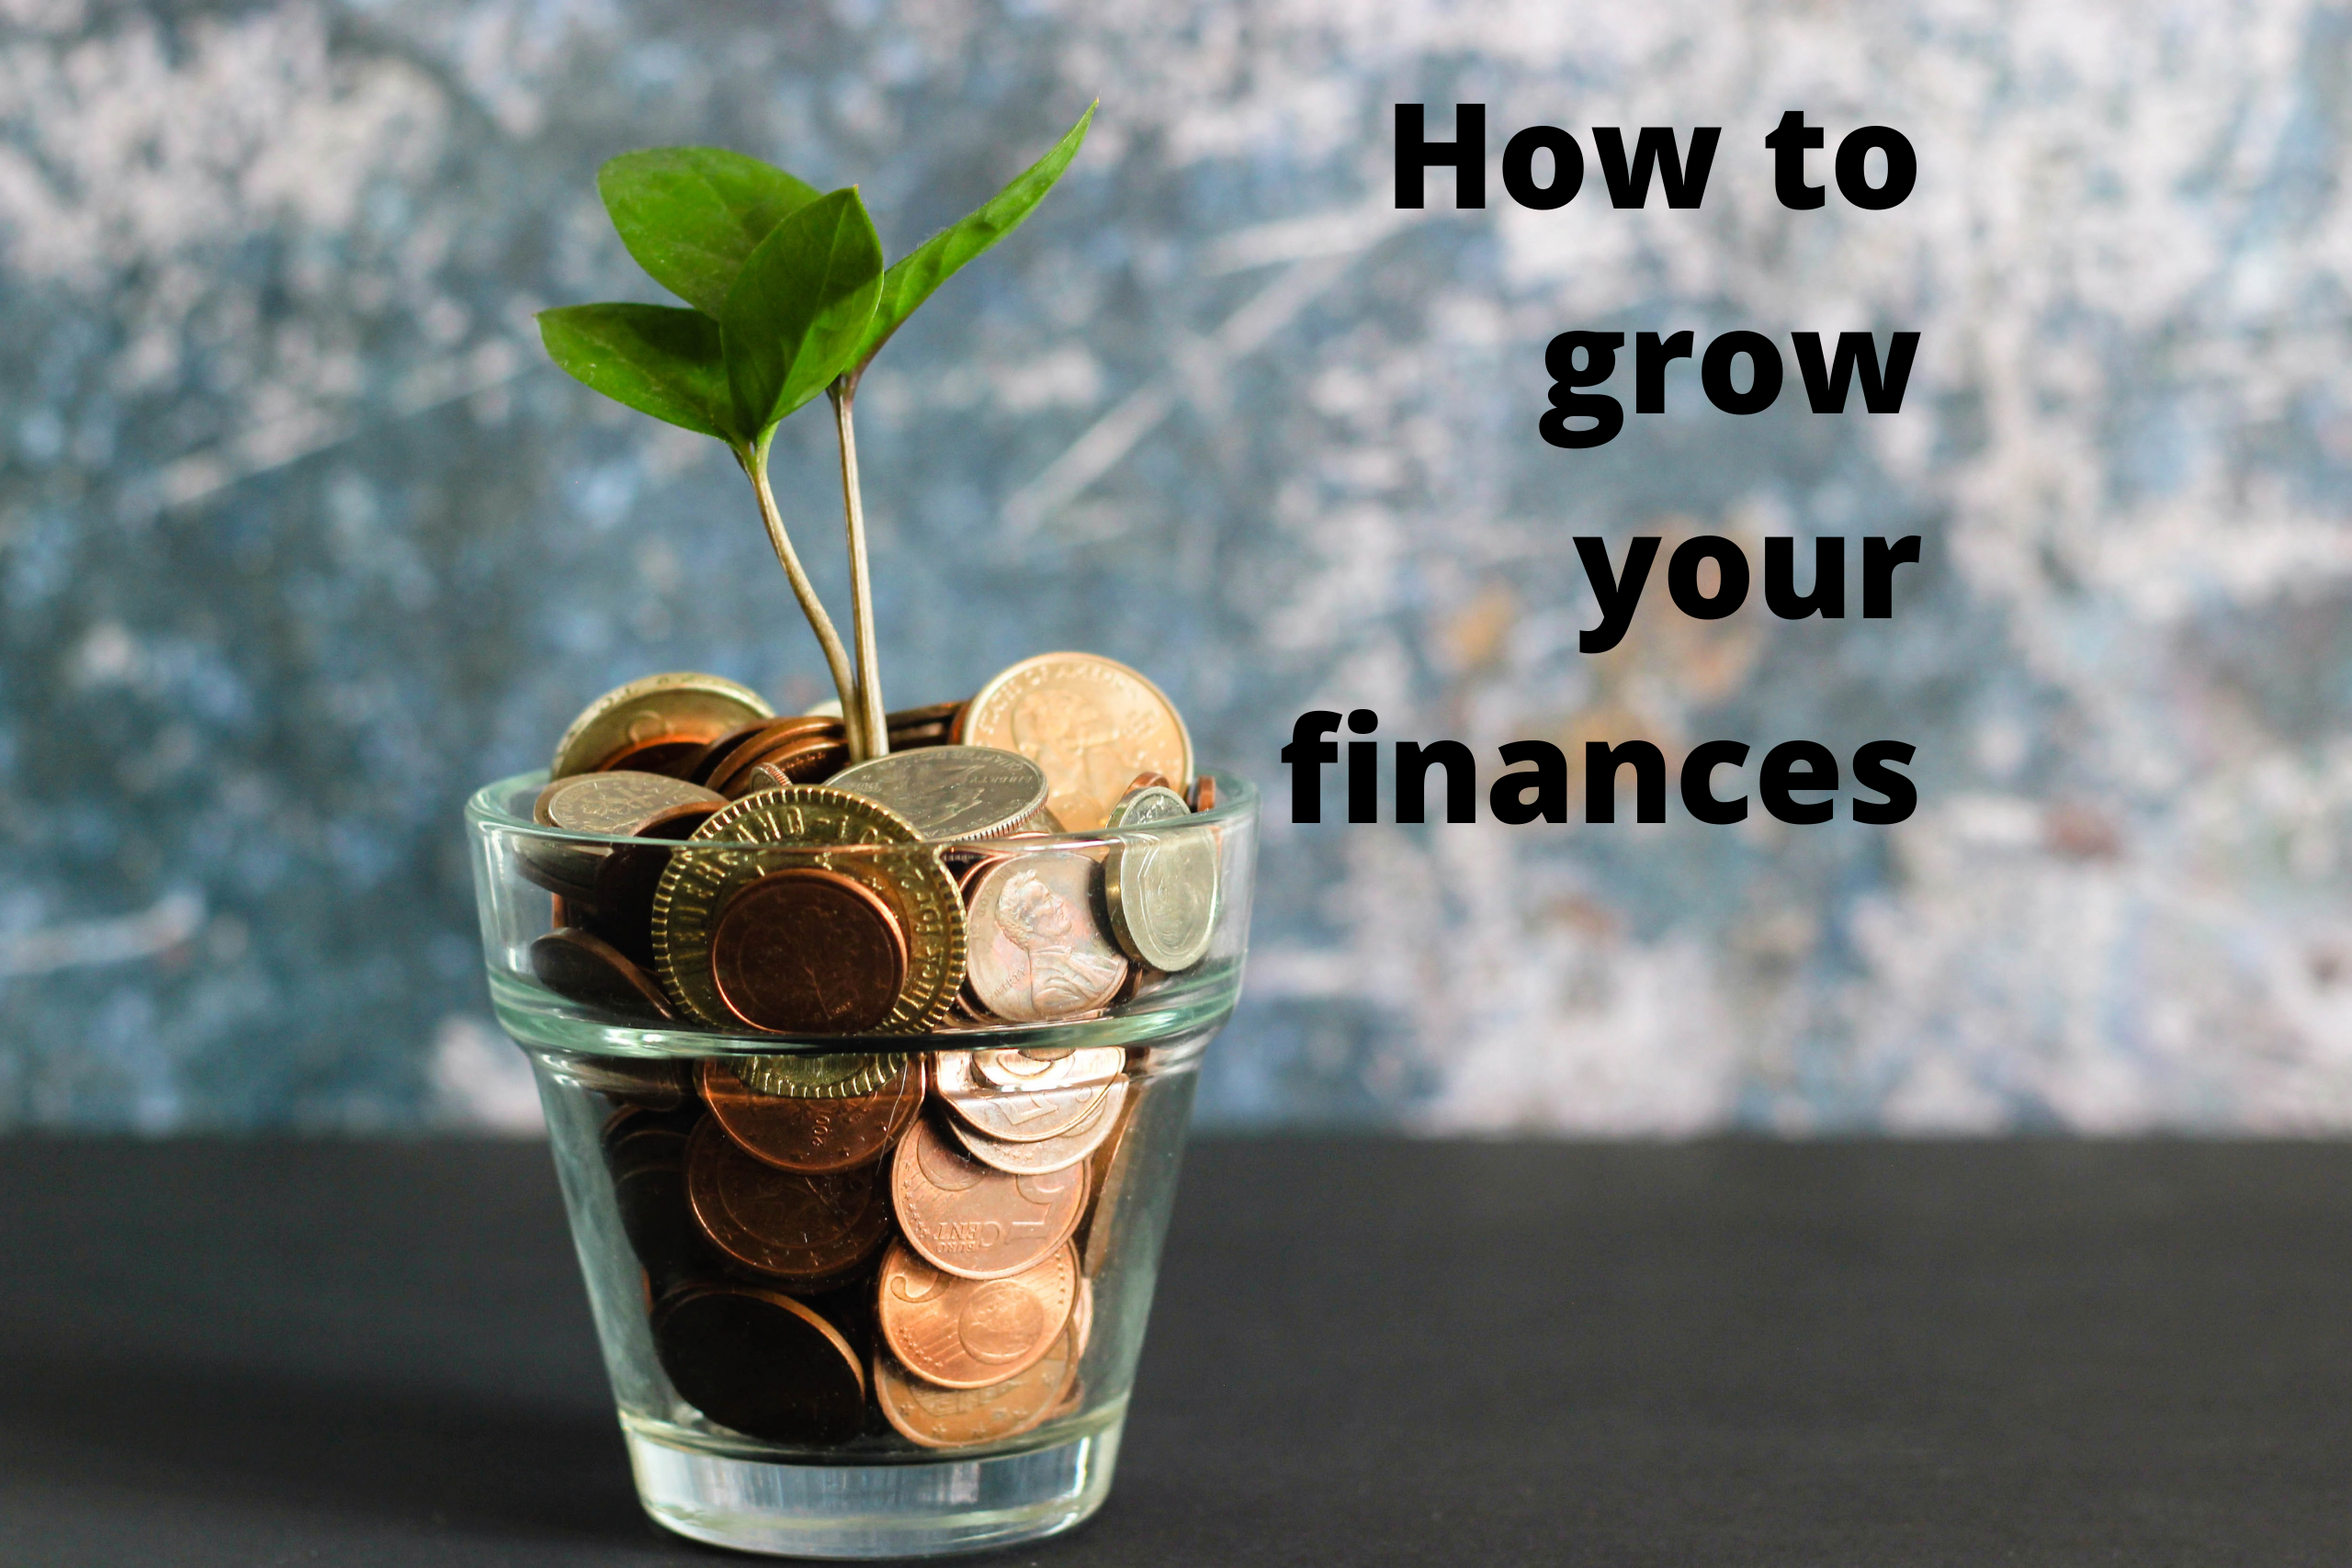 Grow-wealth-image-for-personal-finance-for-busy-professionals-blog-post